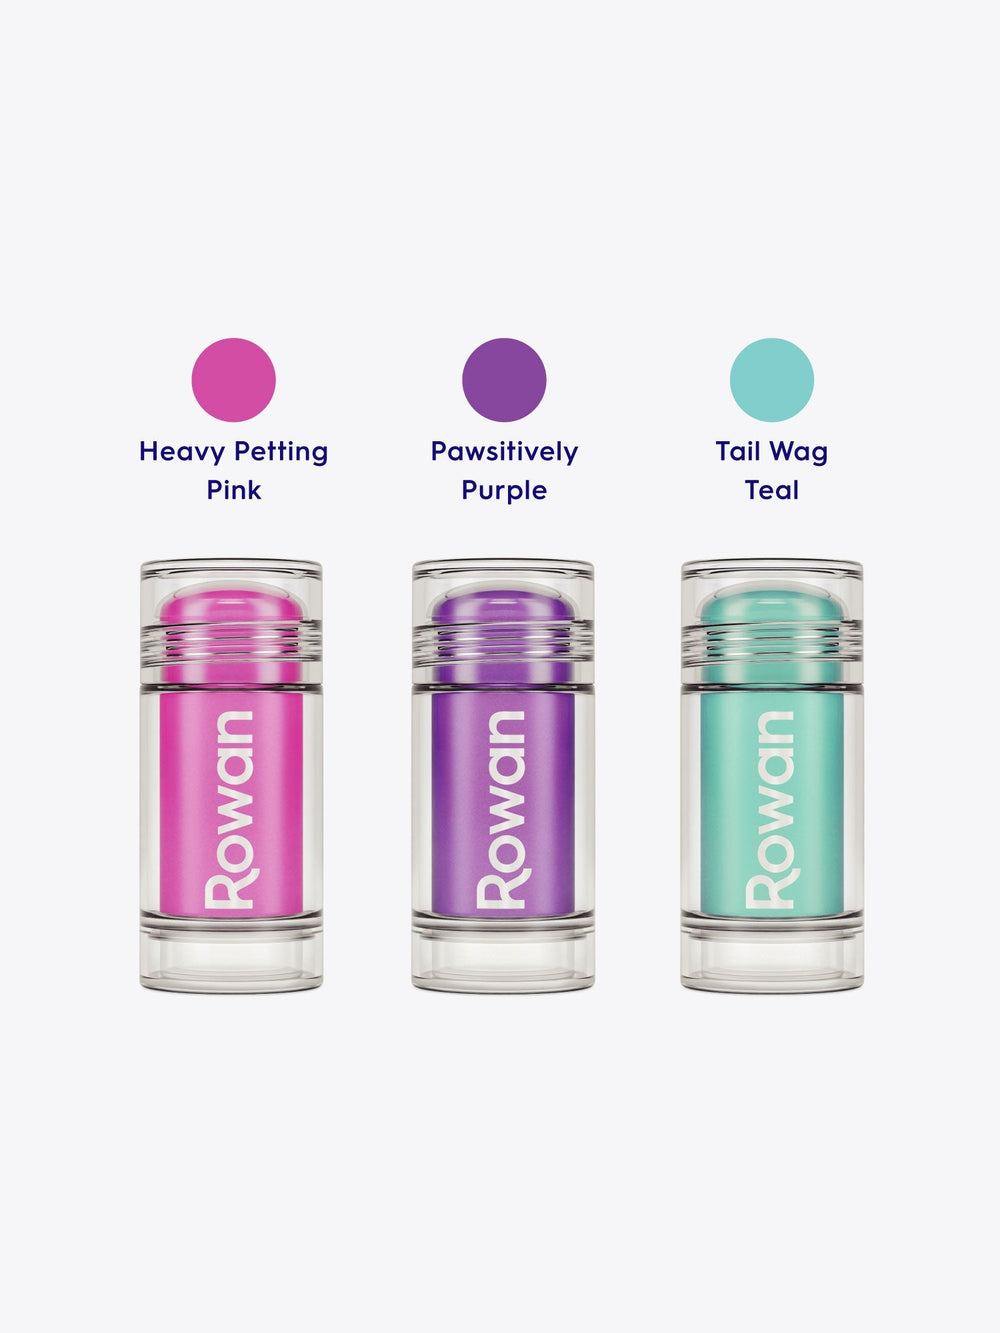 The Color Kit for Dogs - Rowan - Consumerhaus